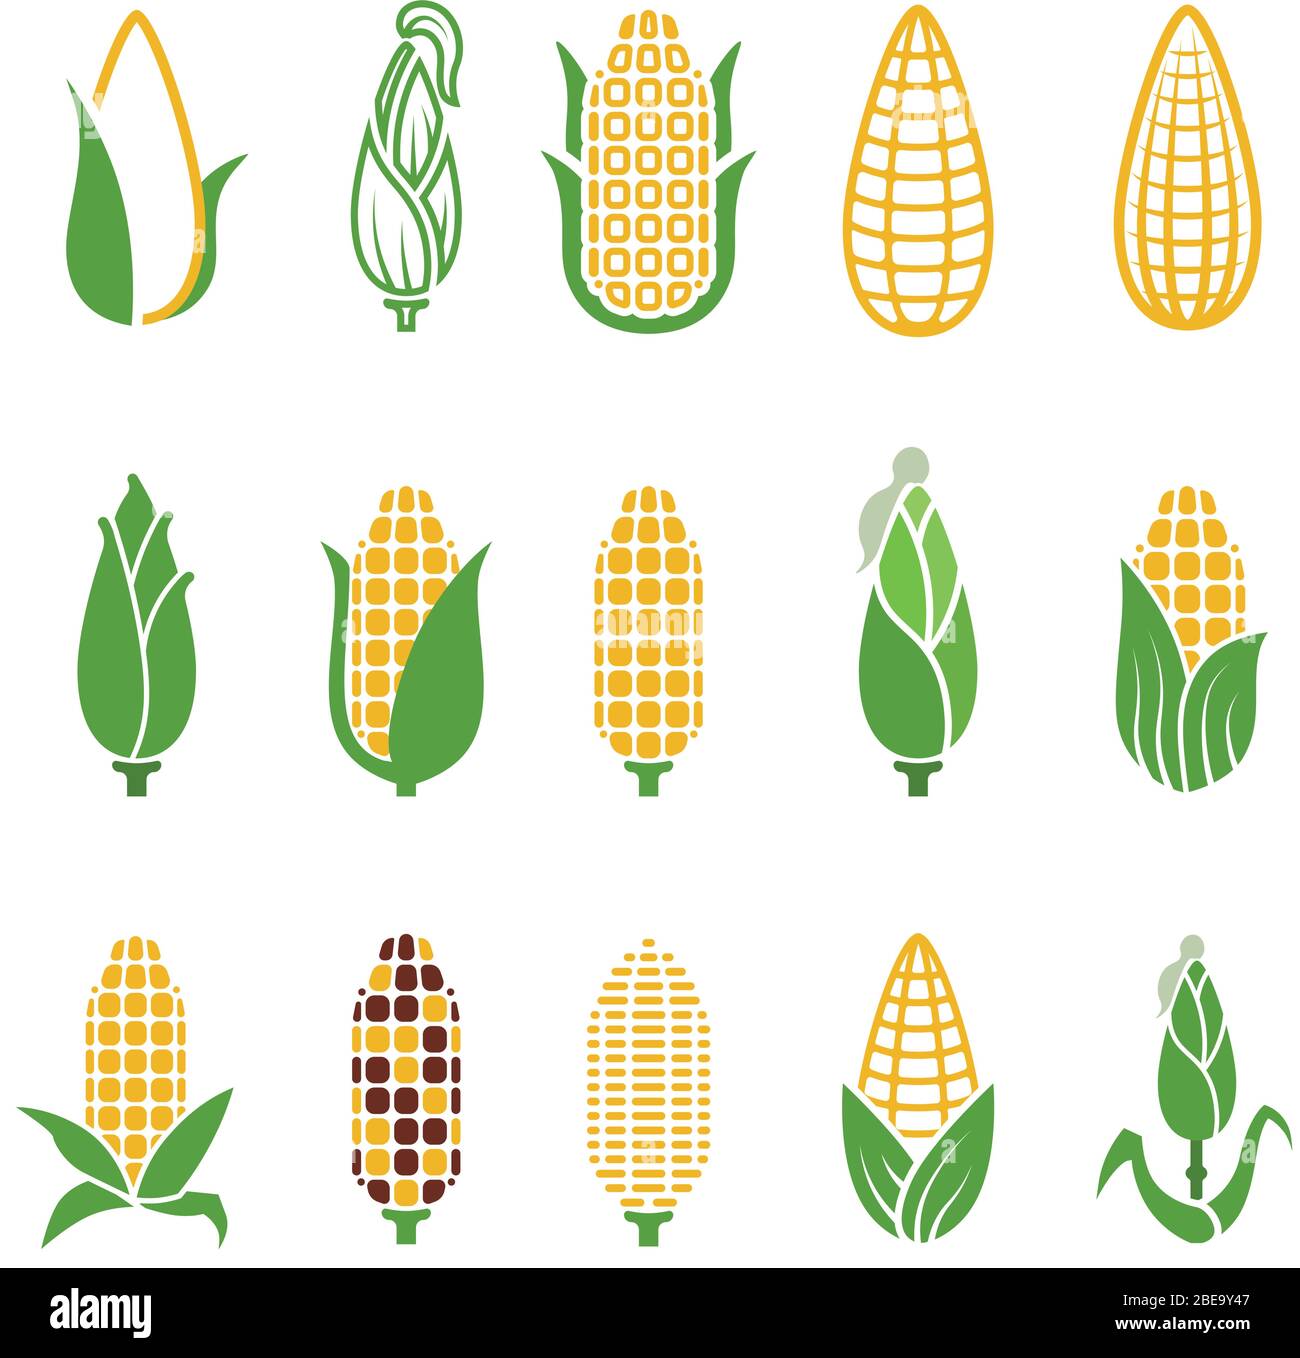 Organic corn vector icons isolated on white background. Corn and corncob vegetable organic illustration Stock Vector